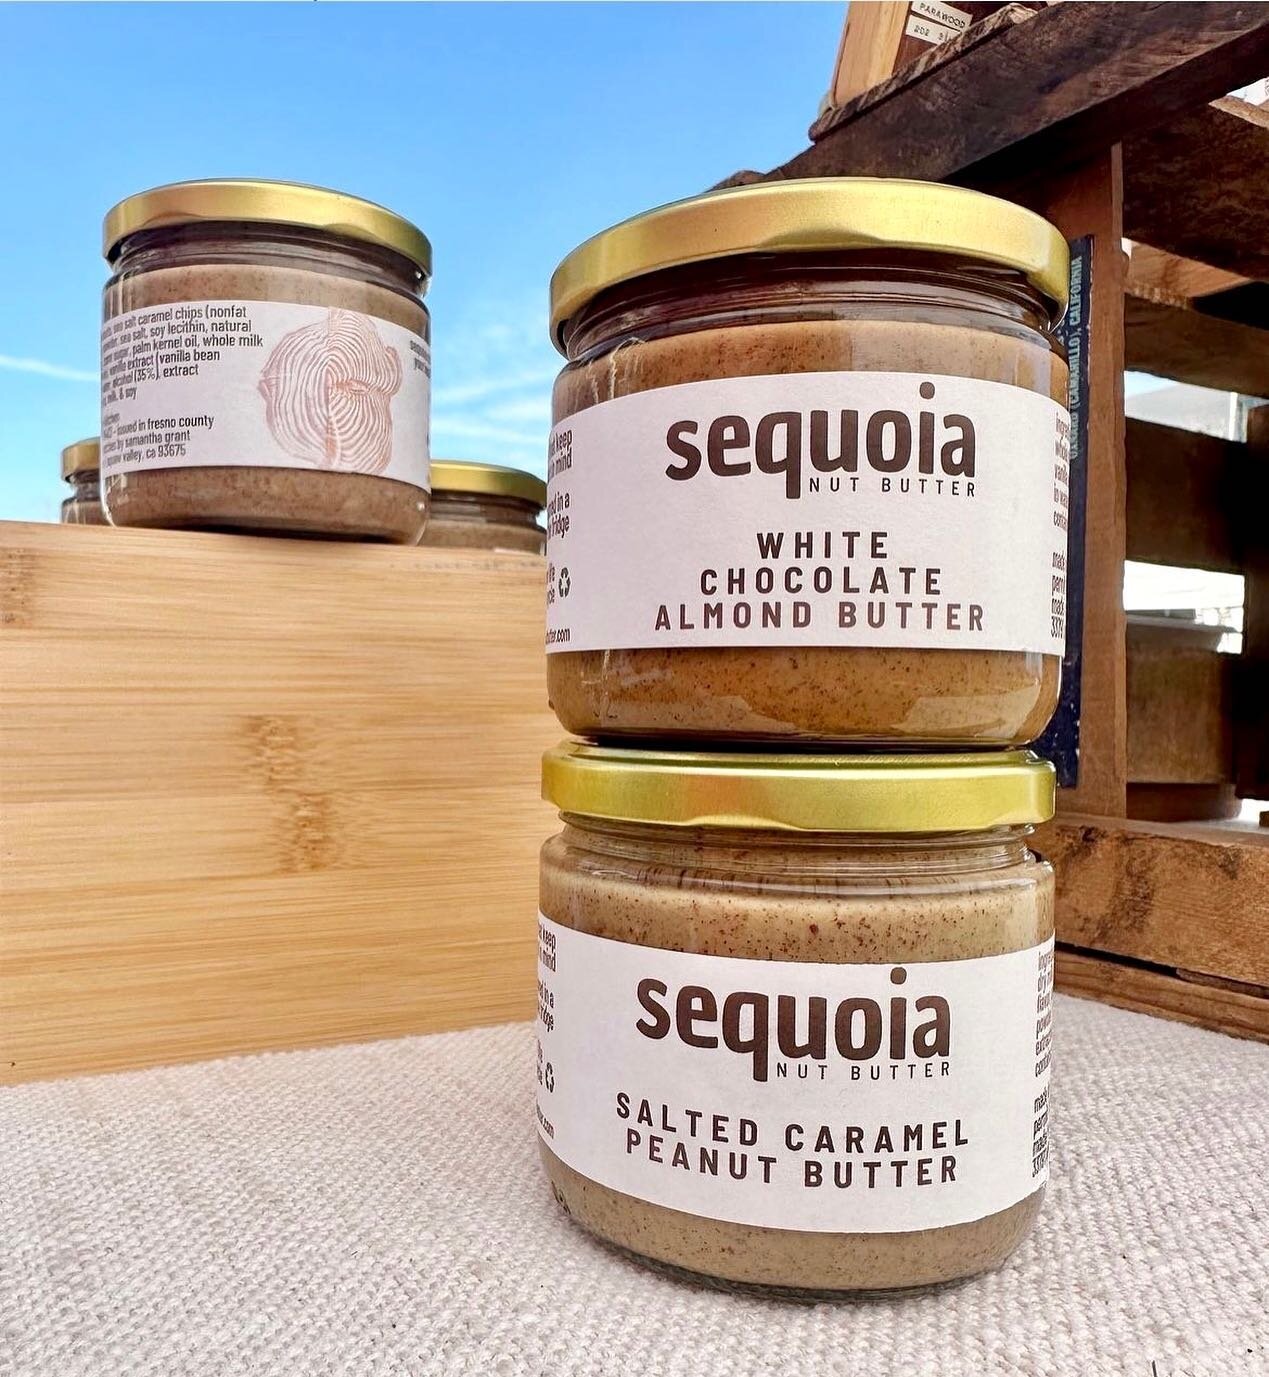 New vendor alert! Find @sequoianutbutter at today&rsquo;s Chula Vista farmers market from 10 am to 2 pm. Spread on a slice of fresh baked bread from @mipanbakery or dip juicy strawberries from @goldenheartfamilyfarms You&rsquo;ll go nuts! #nutbutter 